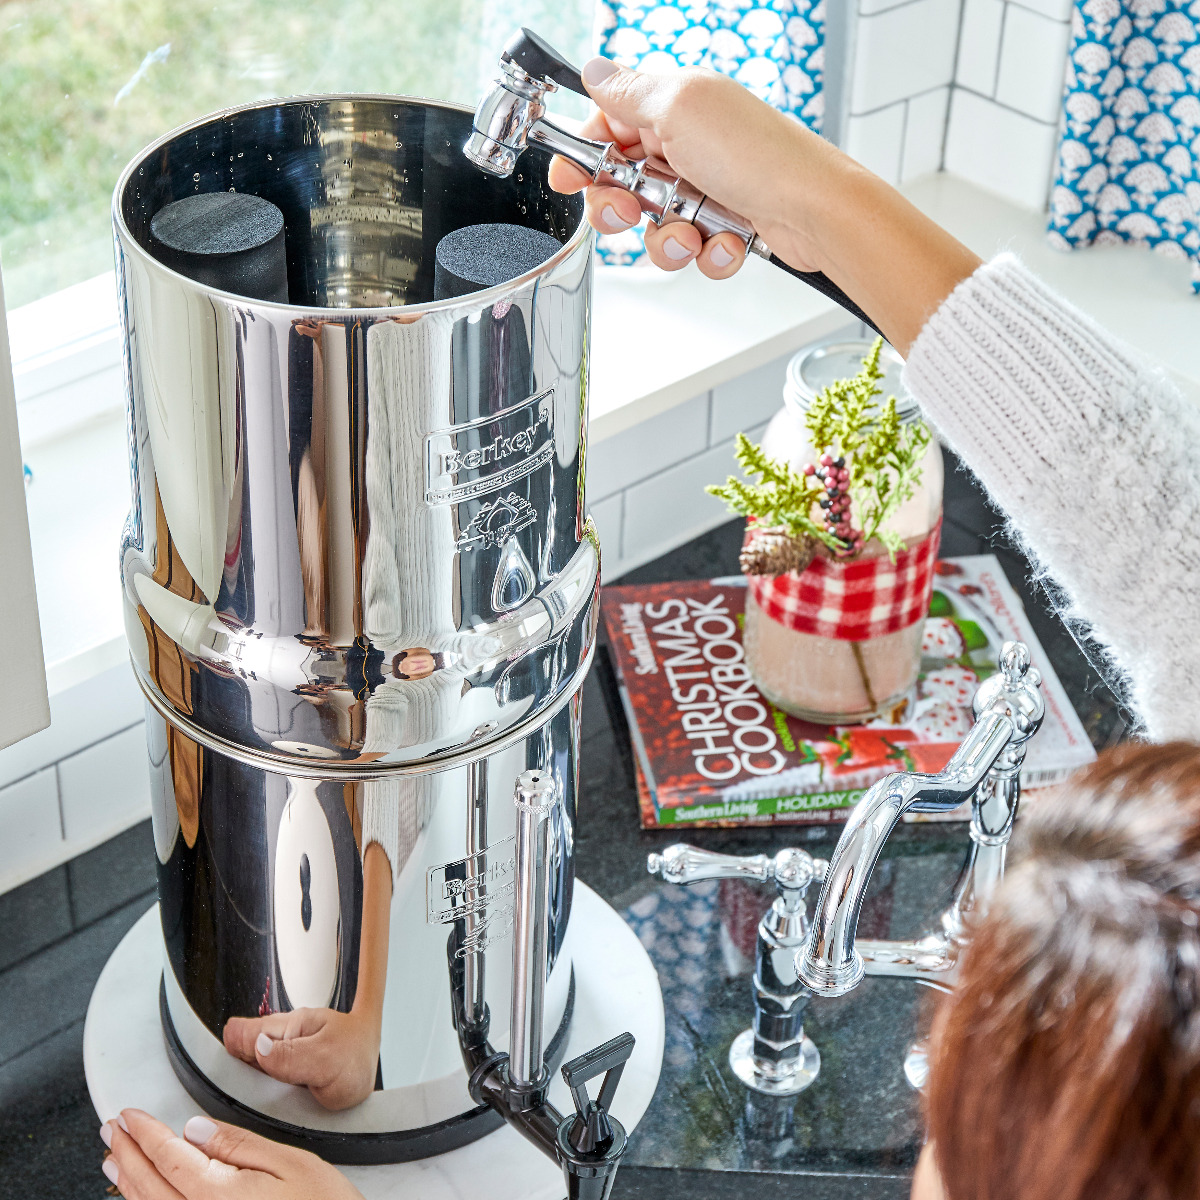 Are there any Drawbacks or Limitations to using a Berkey Water Filter?